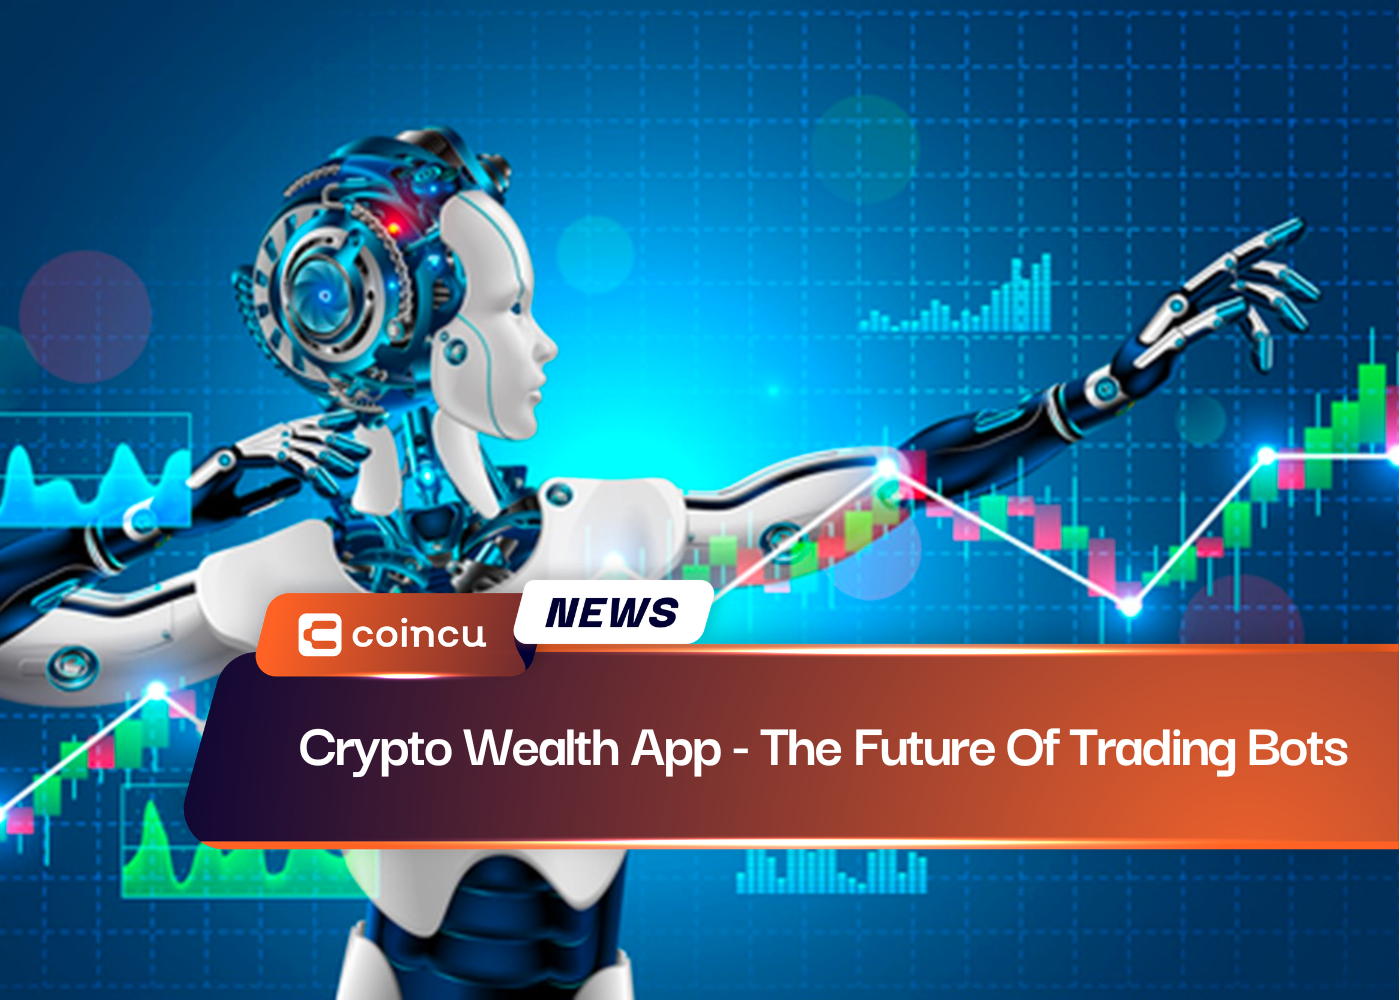 Crypto Wealth App - The Future Of Trading Bots